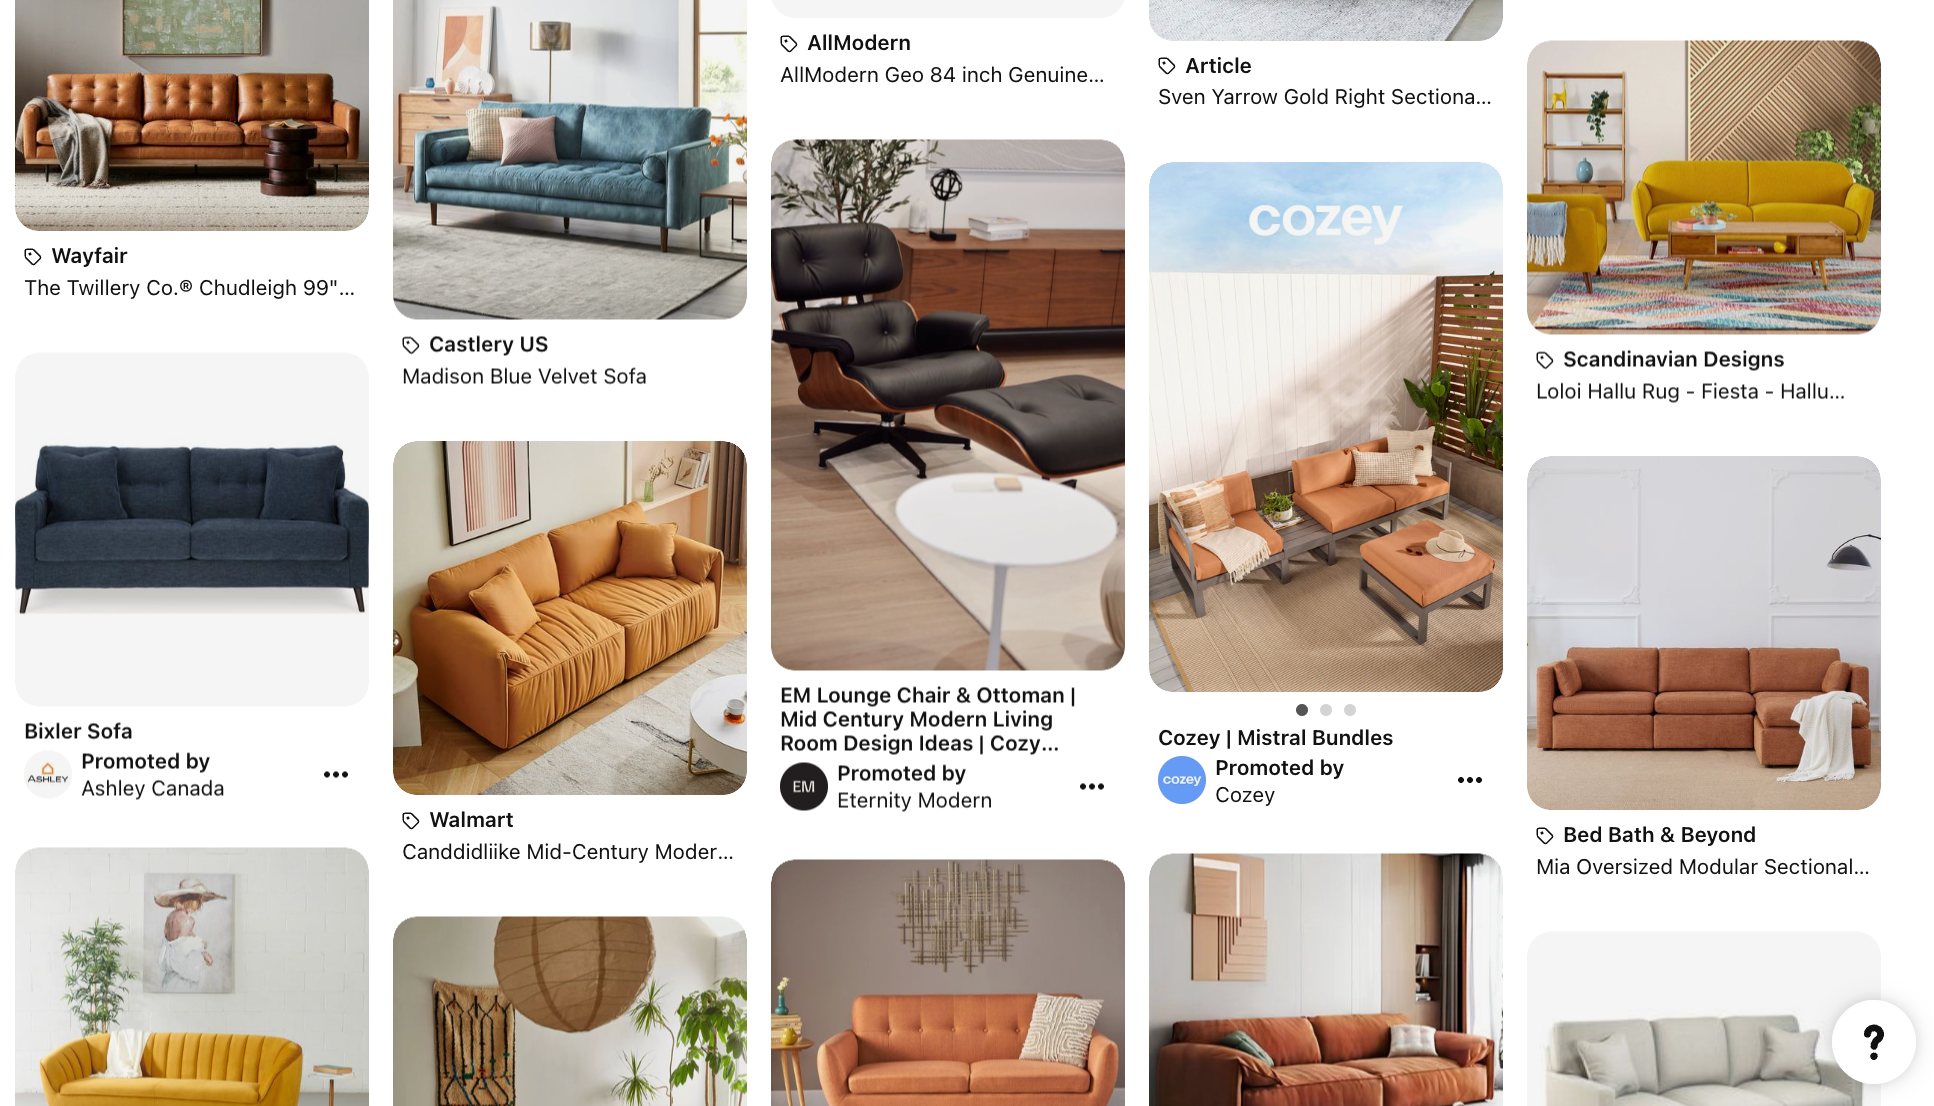 Pinterest search results showing ads